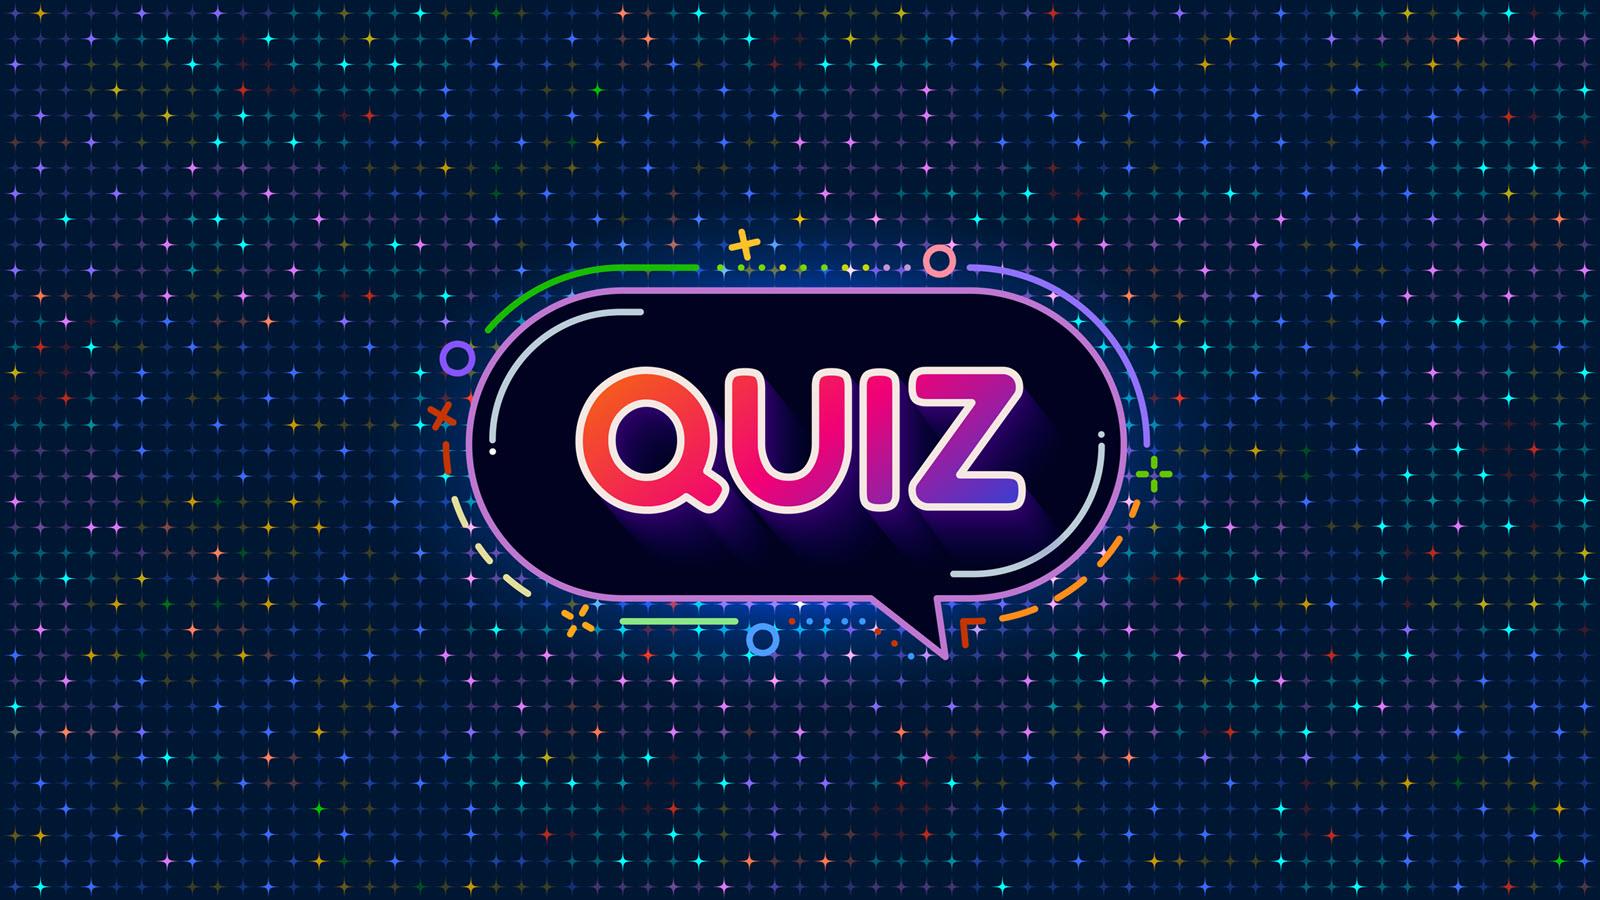 The word "QUIZ" in all capital letters on a digitized background